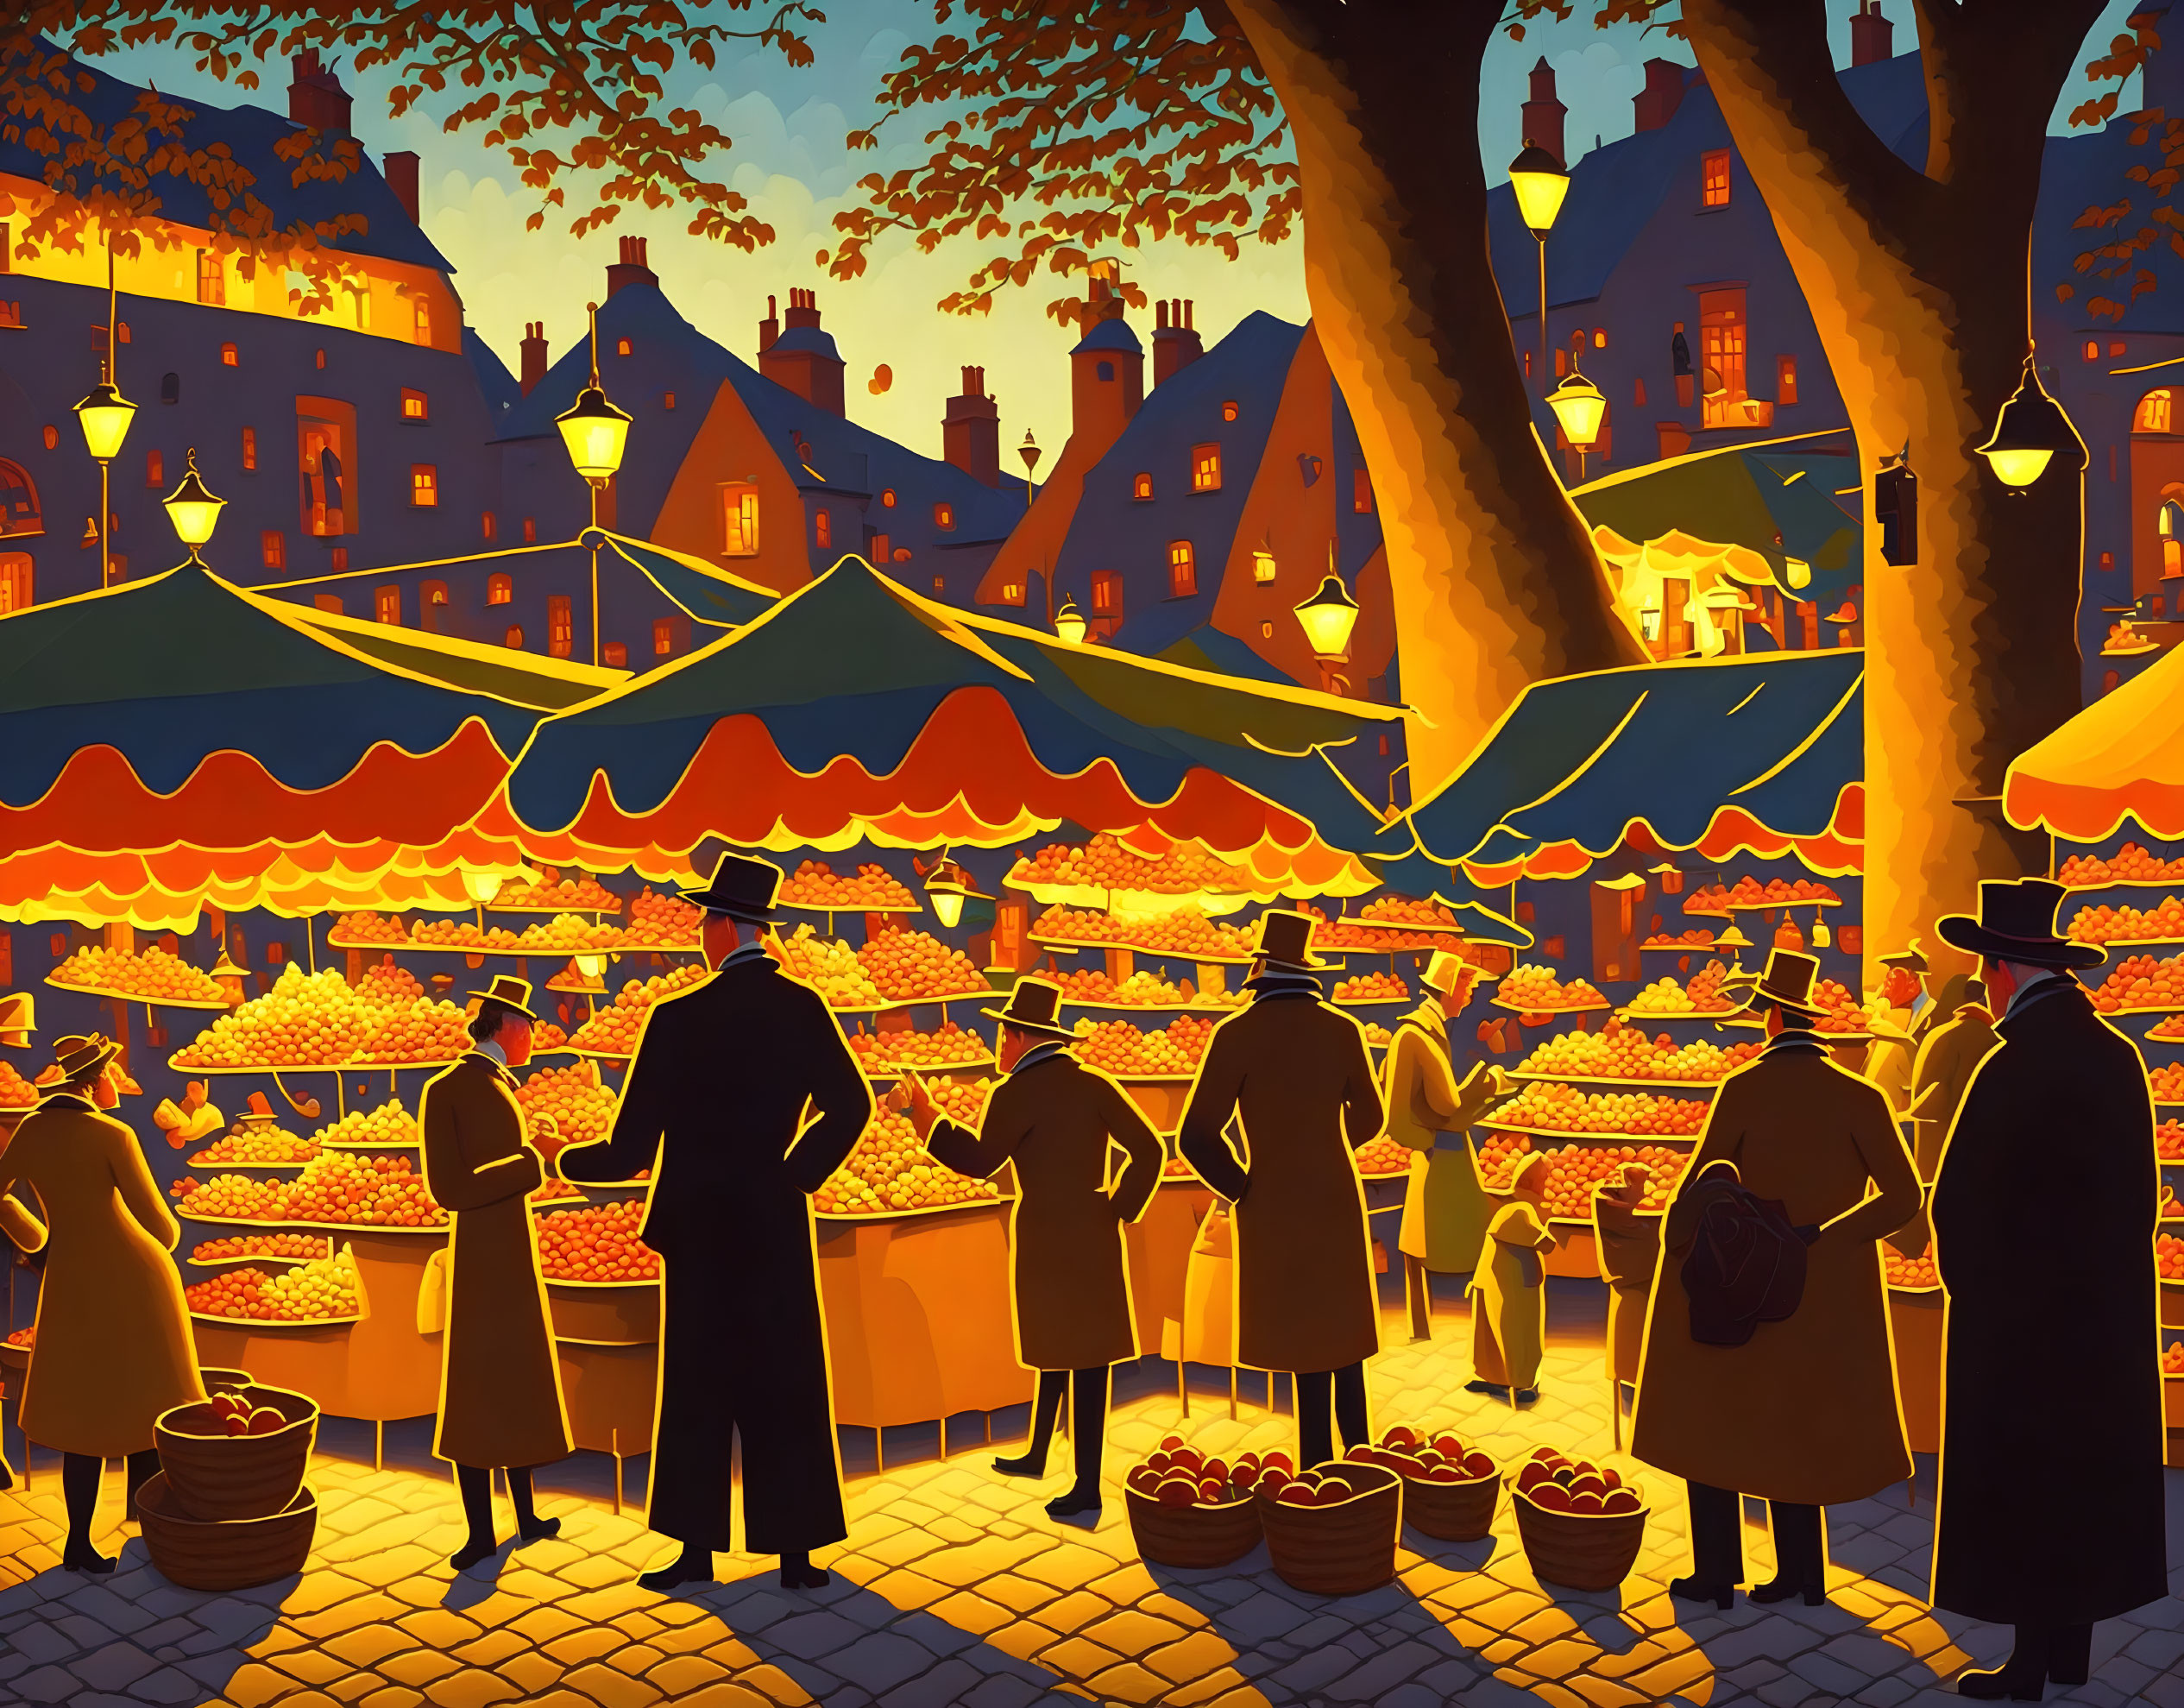 Vibrant outdoor market at dusk with patrons browsing fruit stalls under streetlamps.